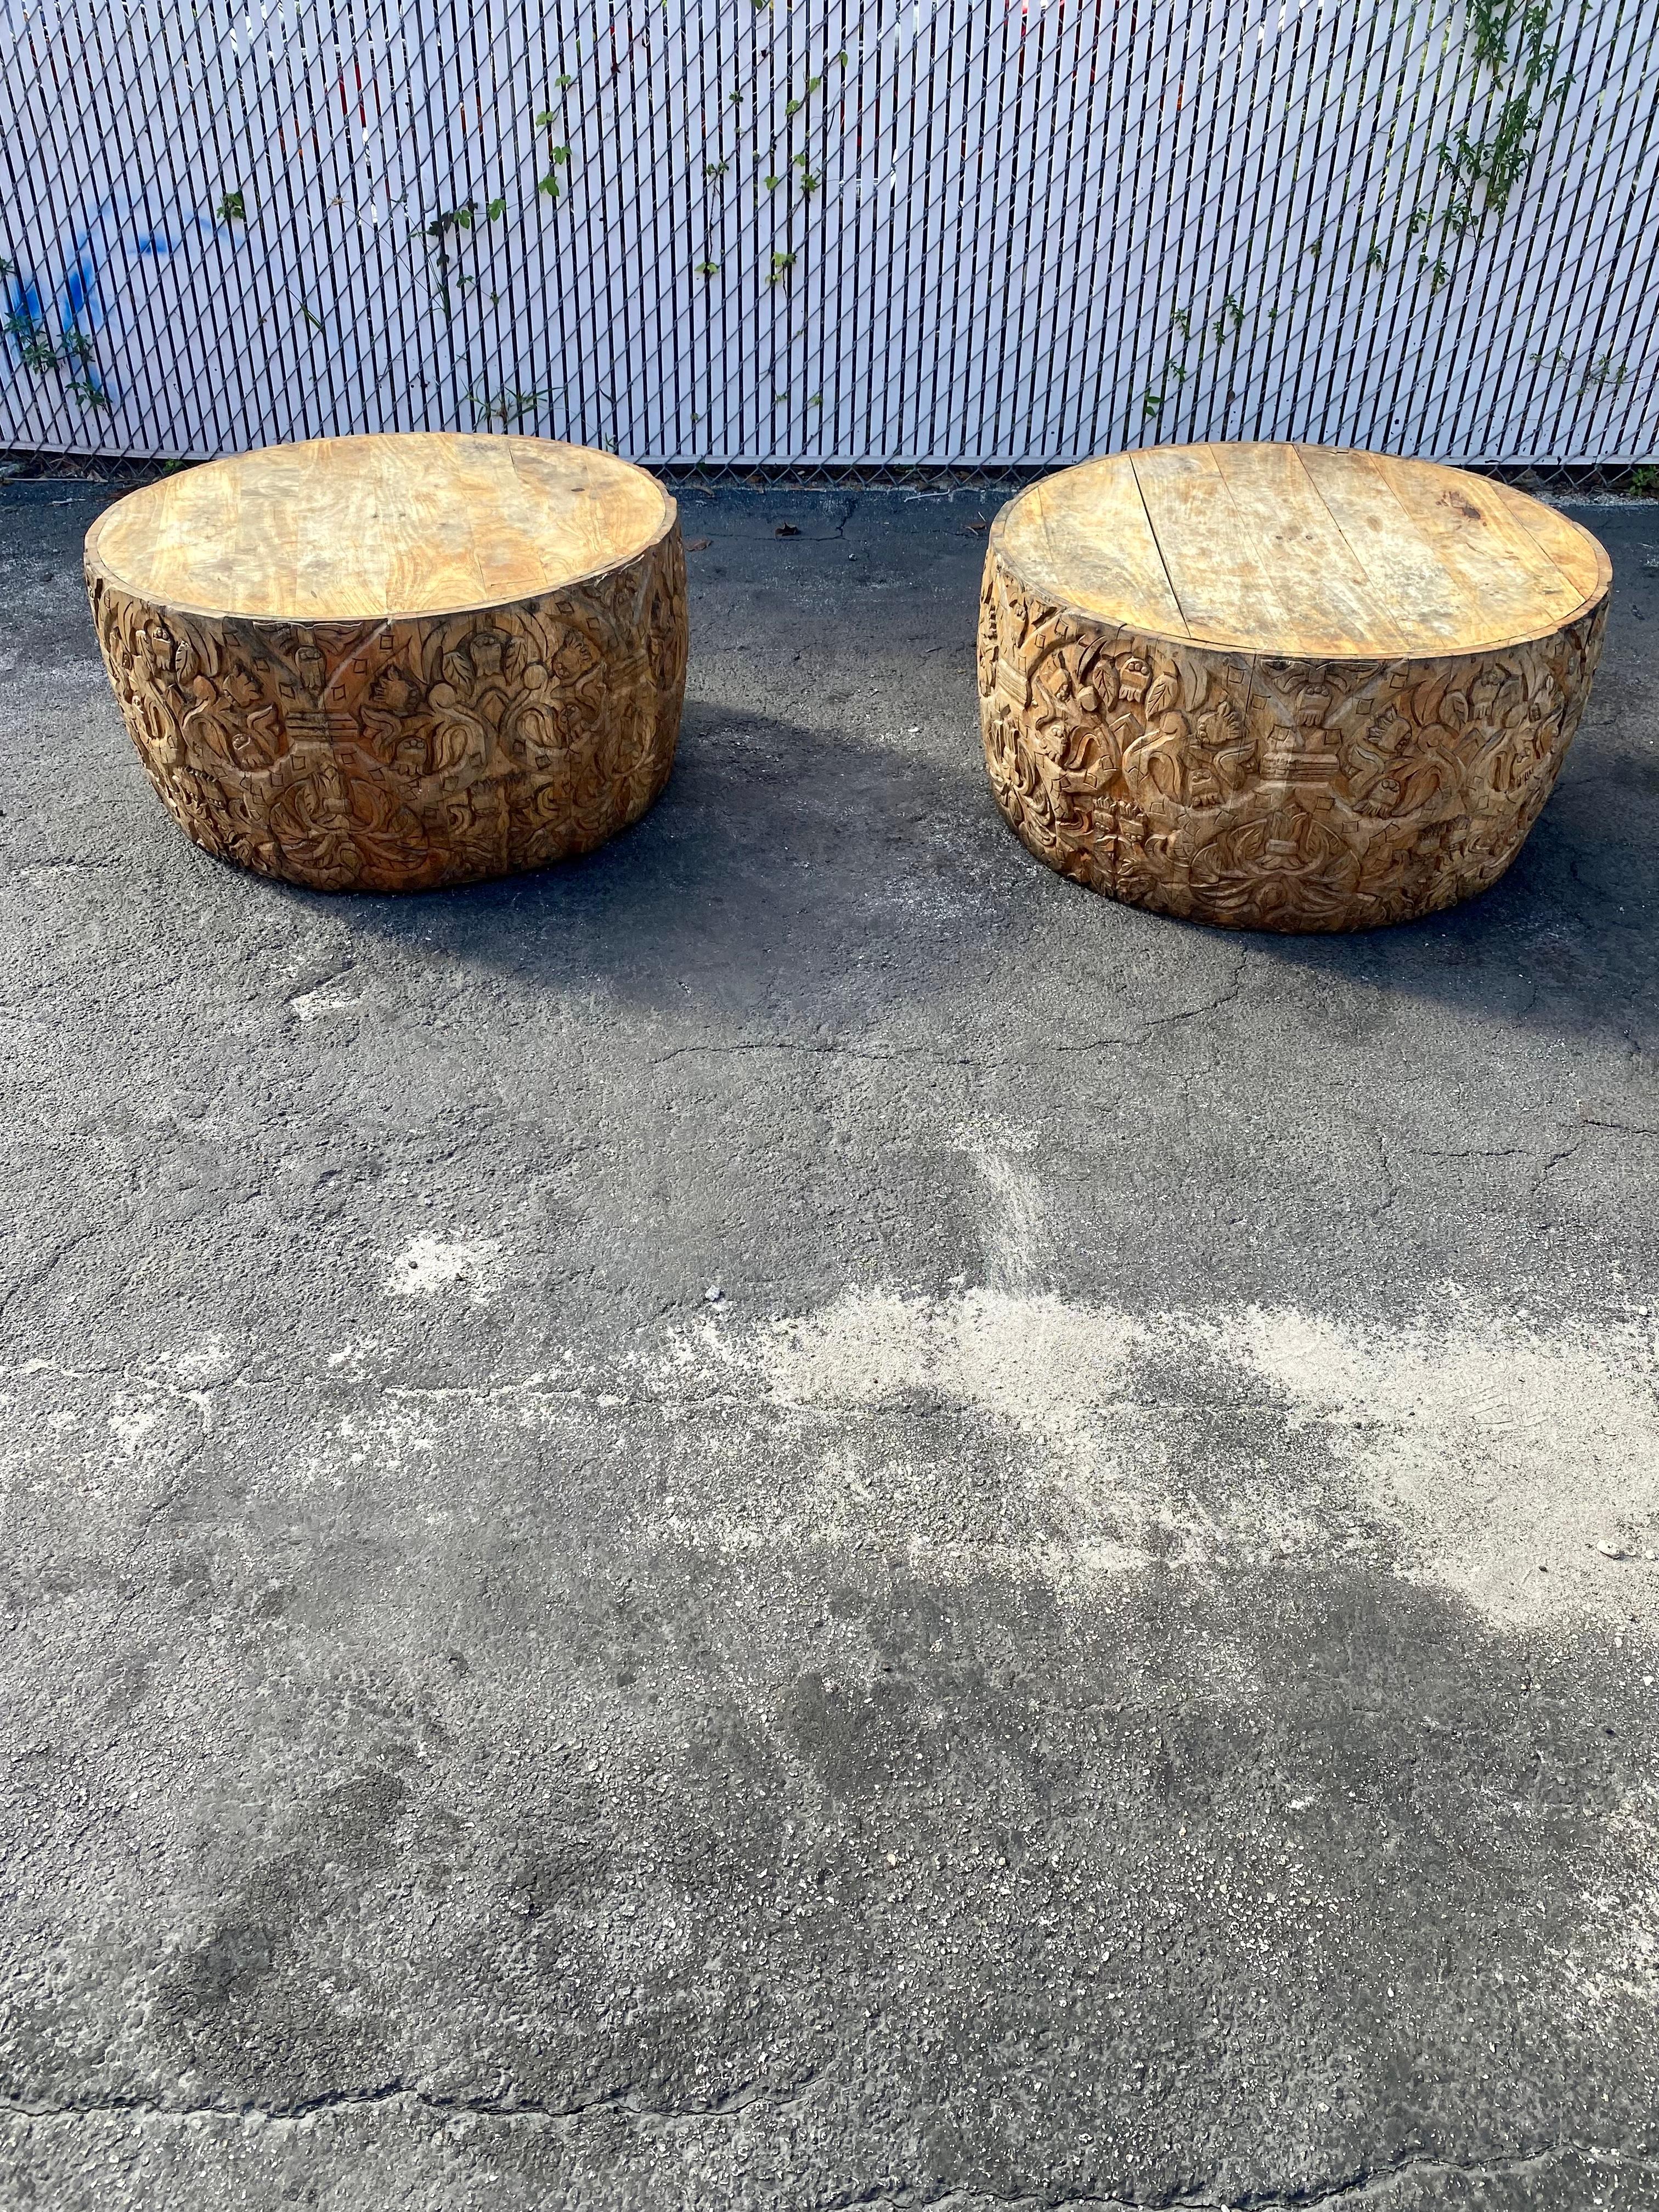 1940s Heavily Carved Teak Gilt Wood Round Drum Coffee Tables, Set of 2 In Good Condition For Sale In Fort Lauderdale, FL